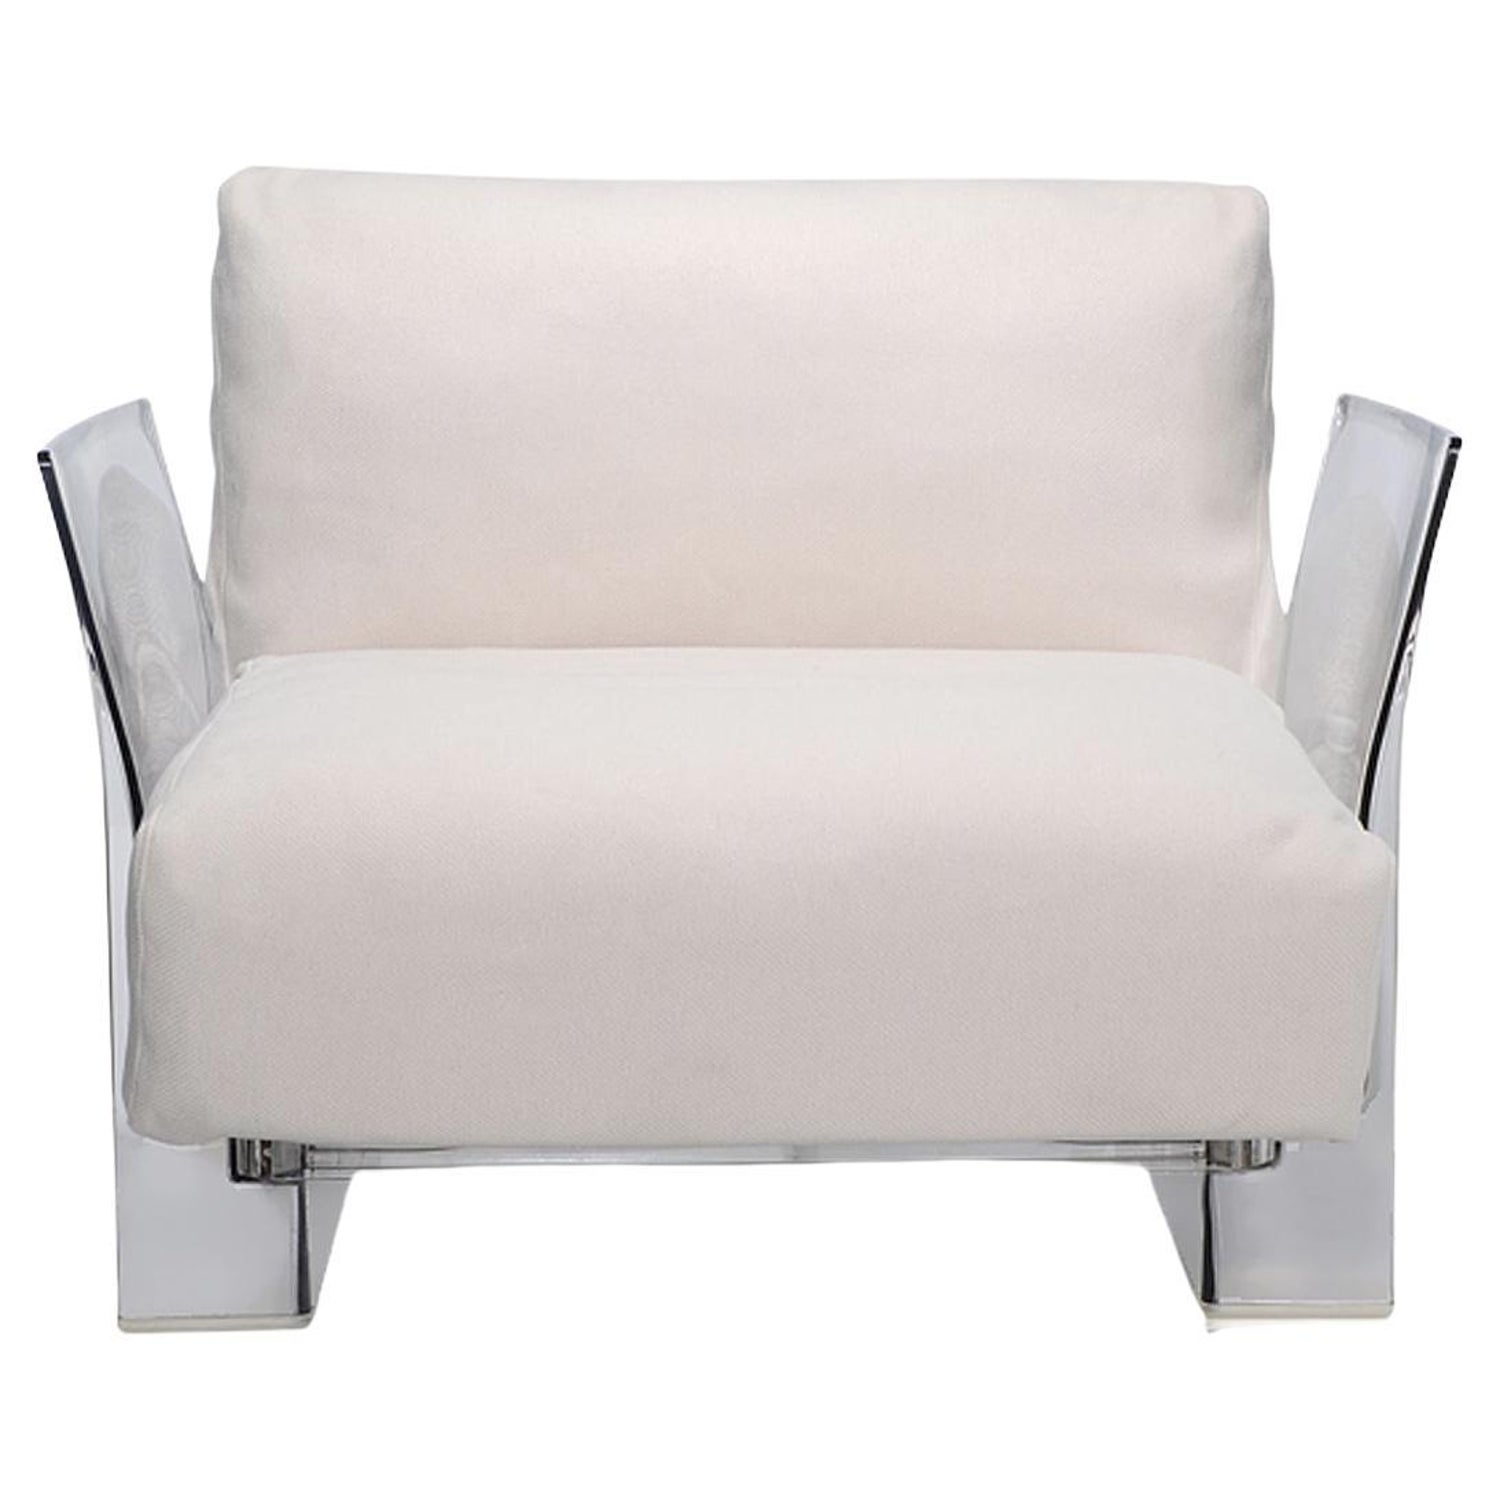 Kartell Pop Outdoor Armchair in White by Piero Lissoni For Sale at 1stDibs  | kartell pop sofa